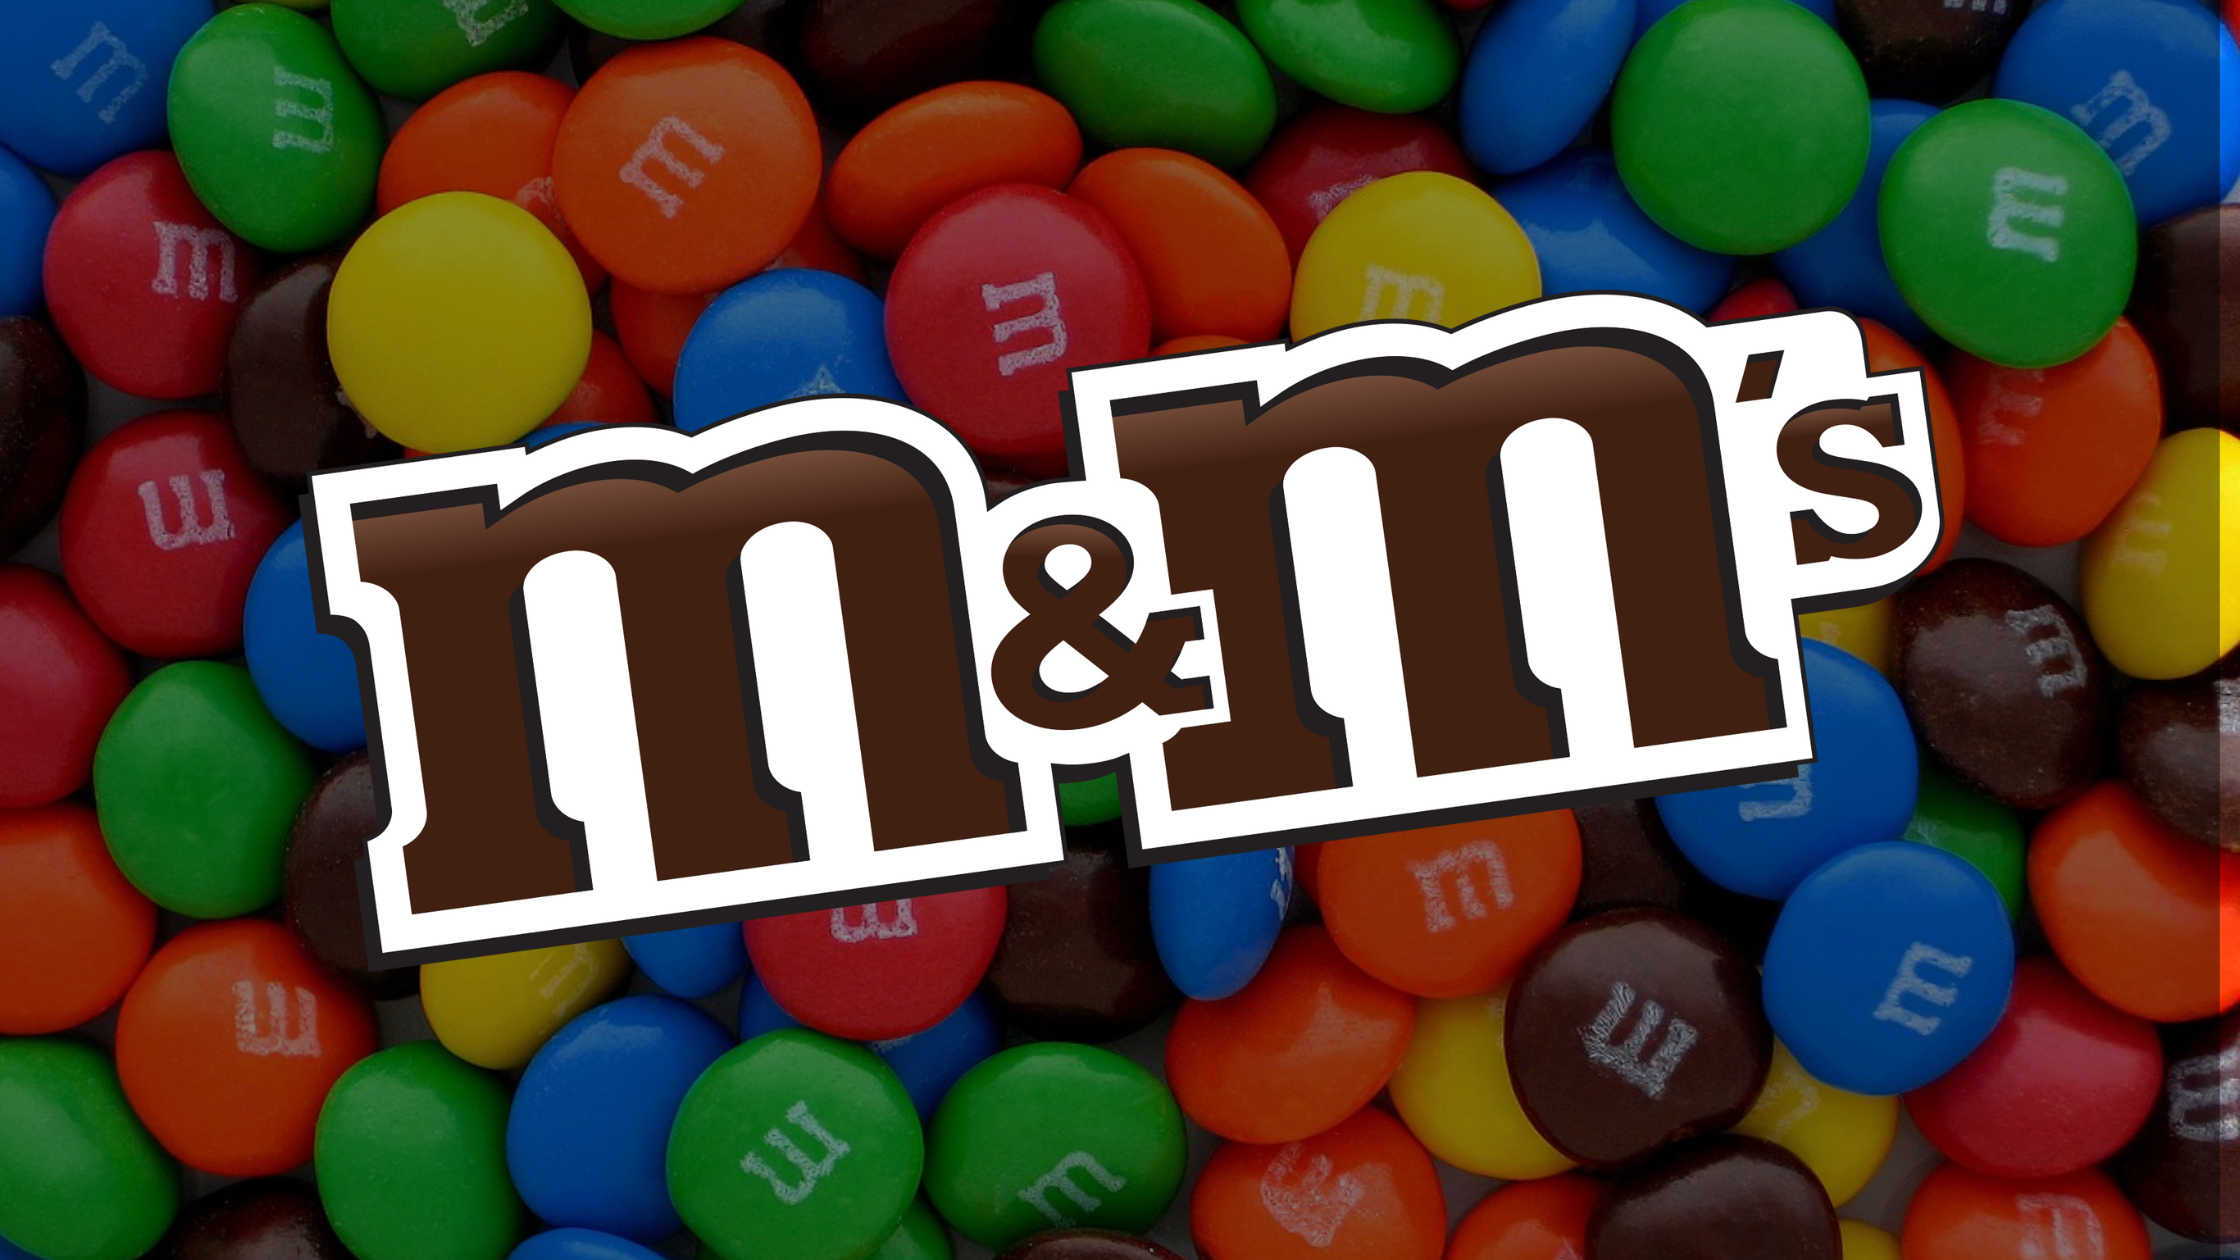 All About Peanut M&Ms and More